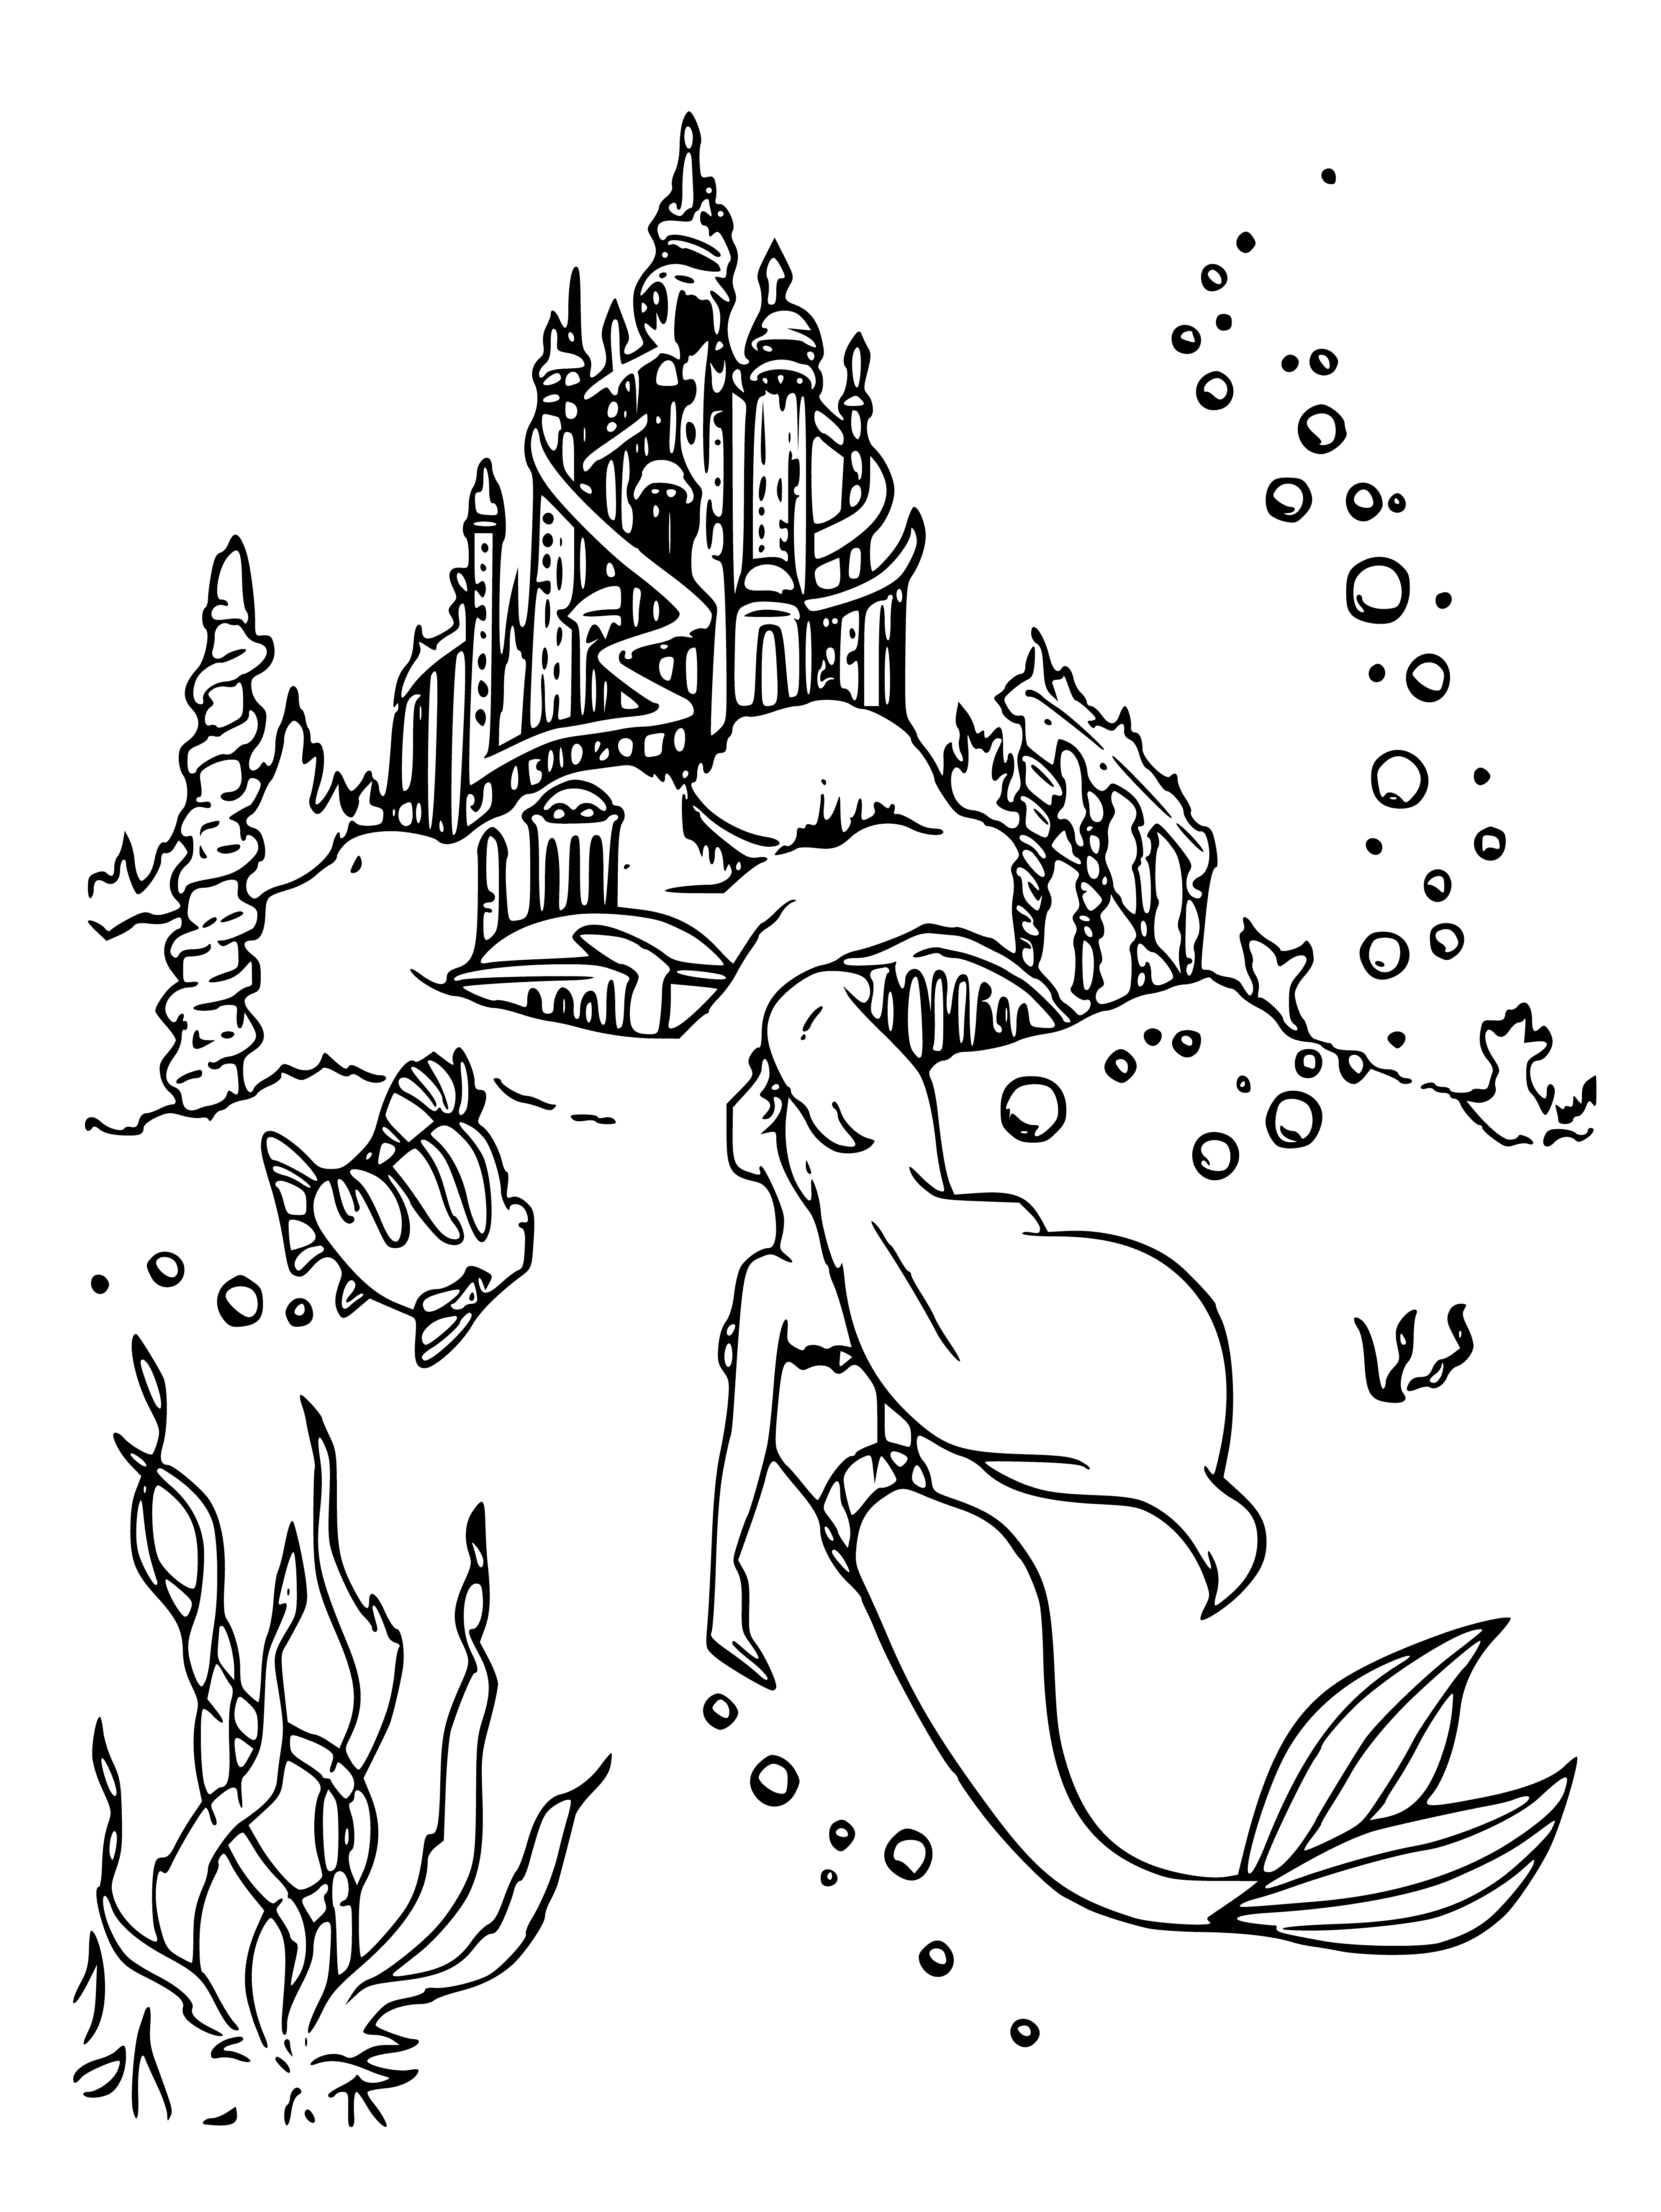 coloring page: Palace of "The Little Mermaid" made of stone, surrounded by moat with fish, with arched doorway and large stone statues of mermaids. Sign reads "Underwater Palace". #fairytaletheme